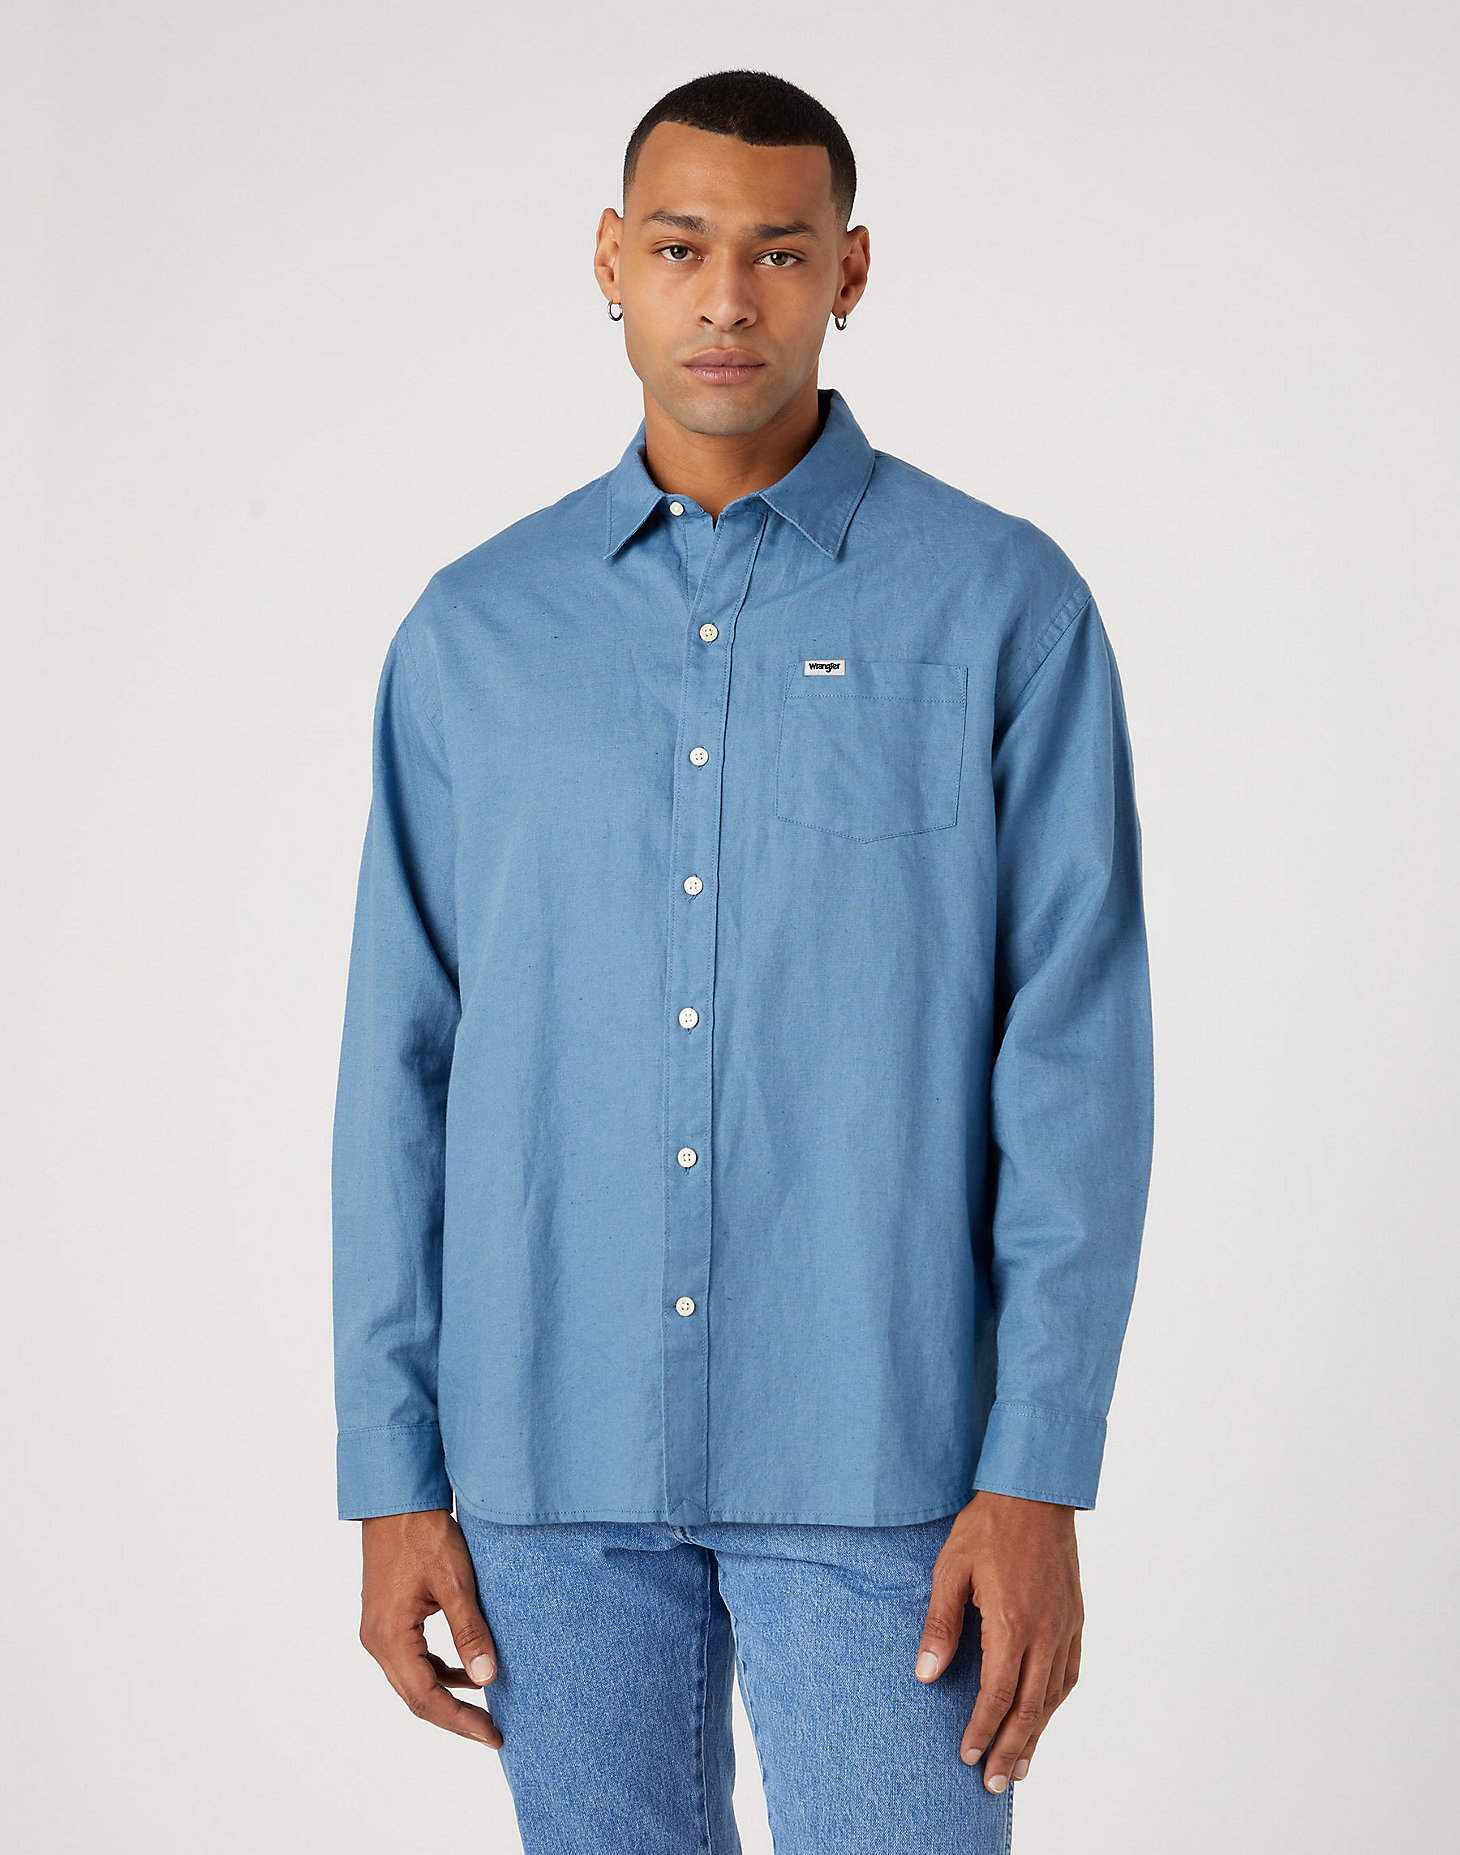 Long Sleeve One Pocket Shirt in Captains Blue main view